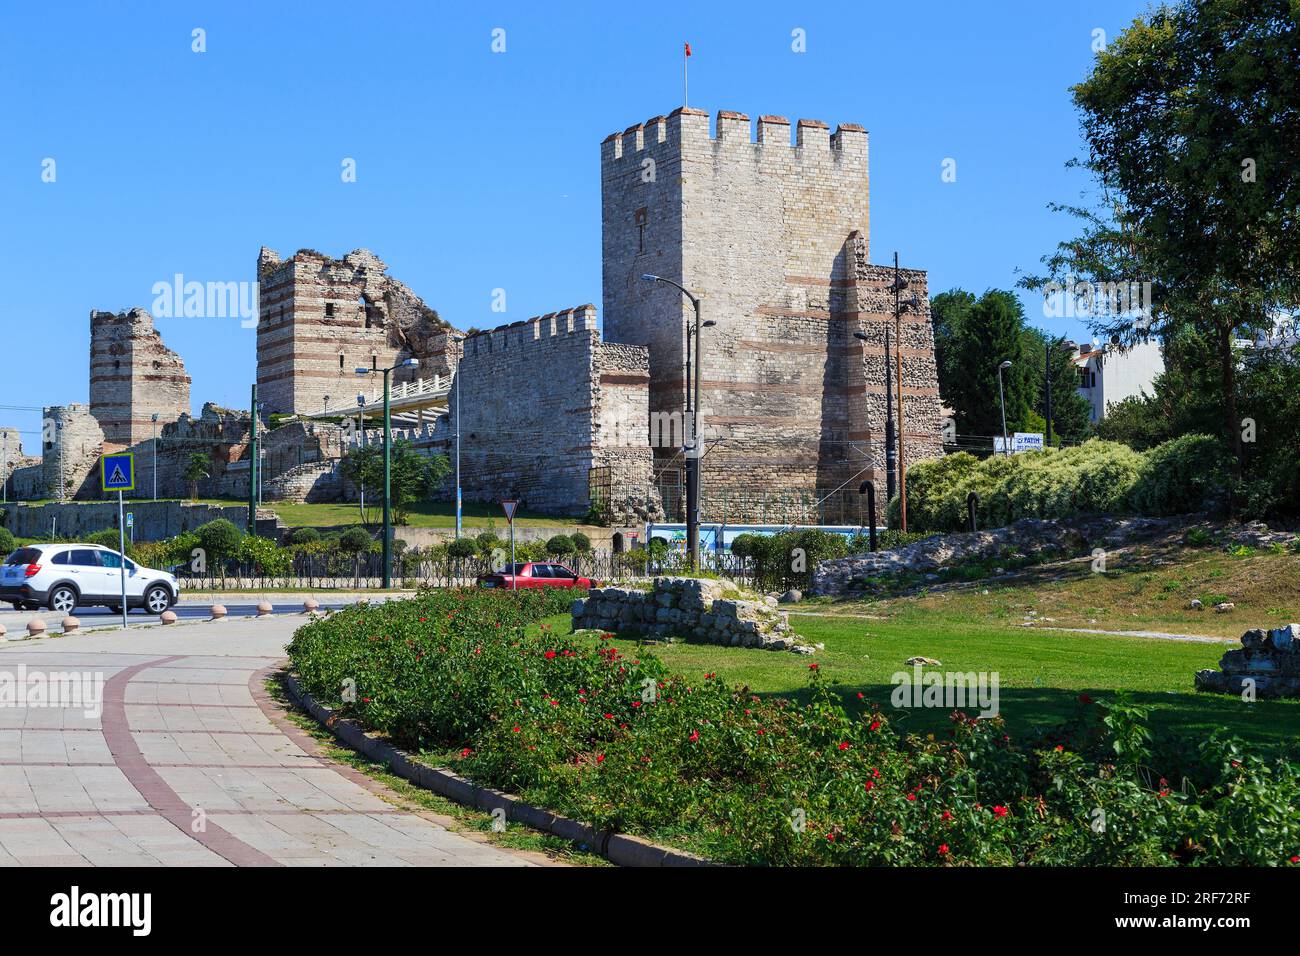 ISTANBUL, TURKEY - SEPTEMBER 14, 2017: These are the Byzantine fortress walls of Constantinople (Theodosian Walls) with a modern highway in their open Stock Photo